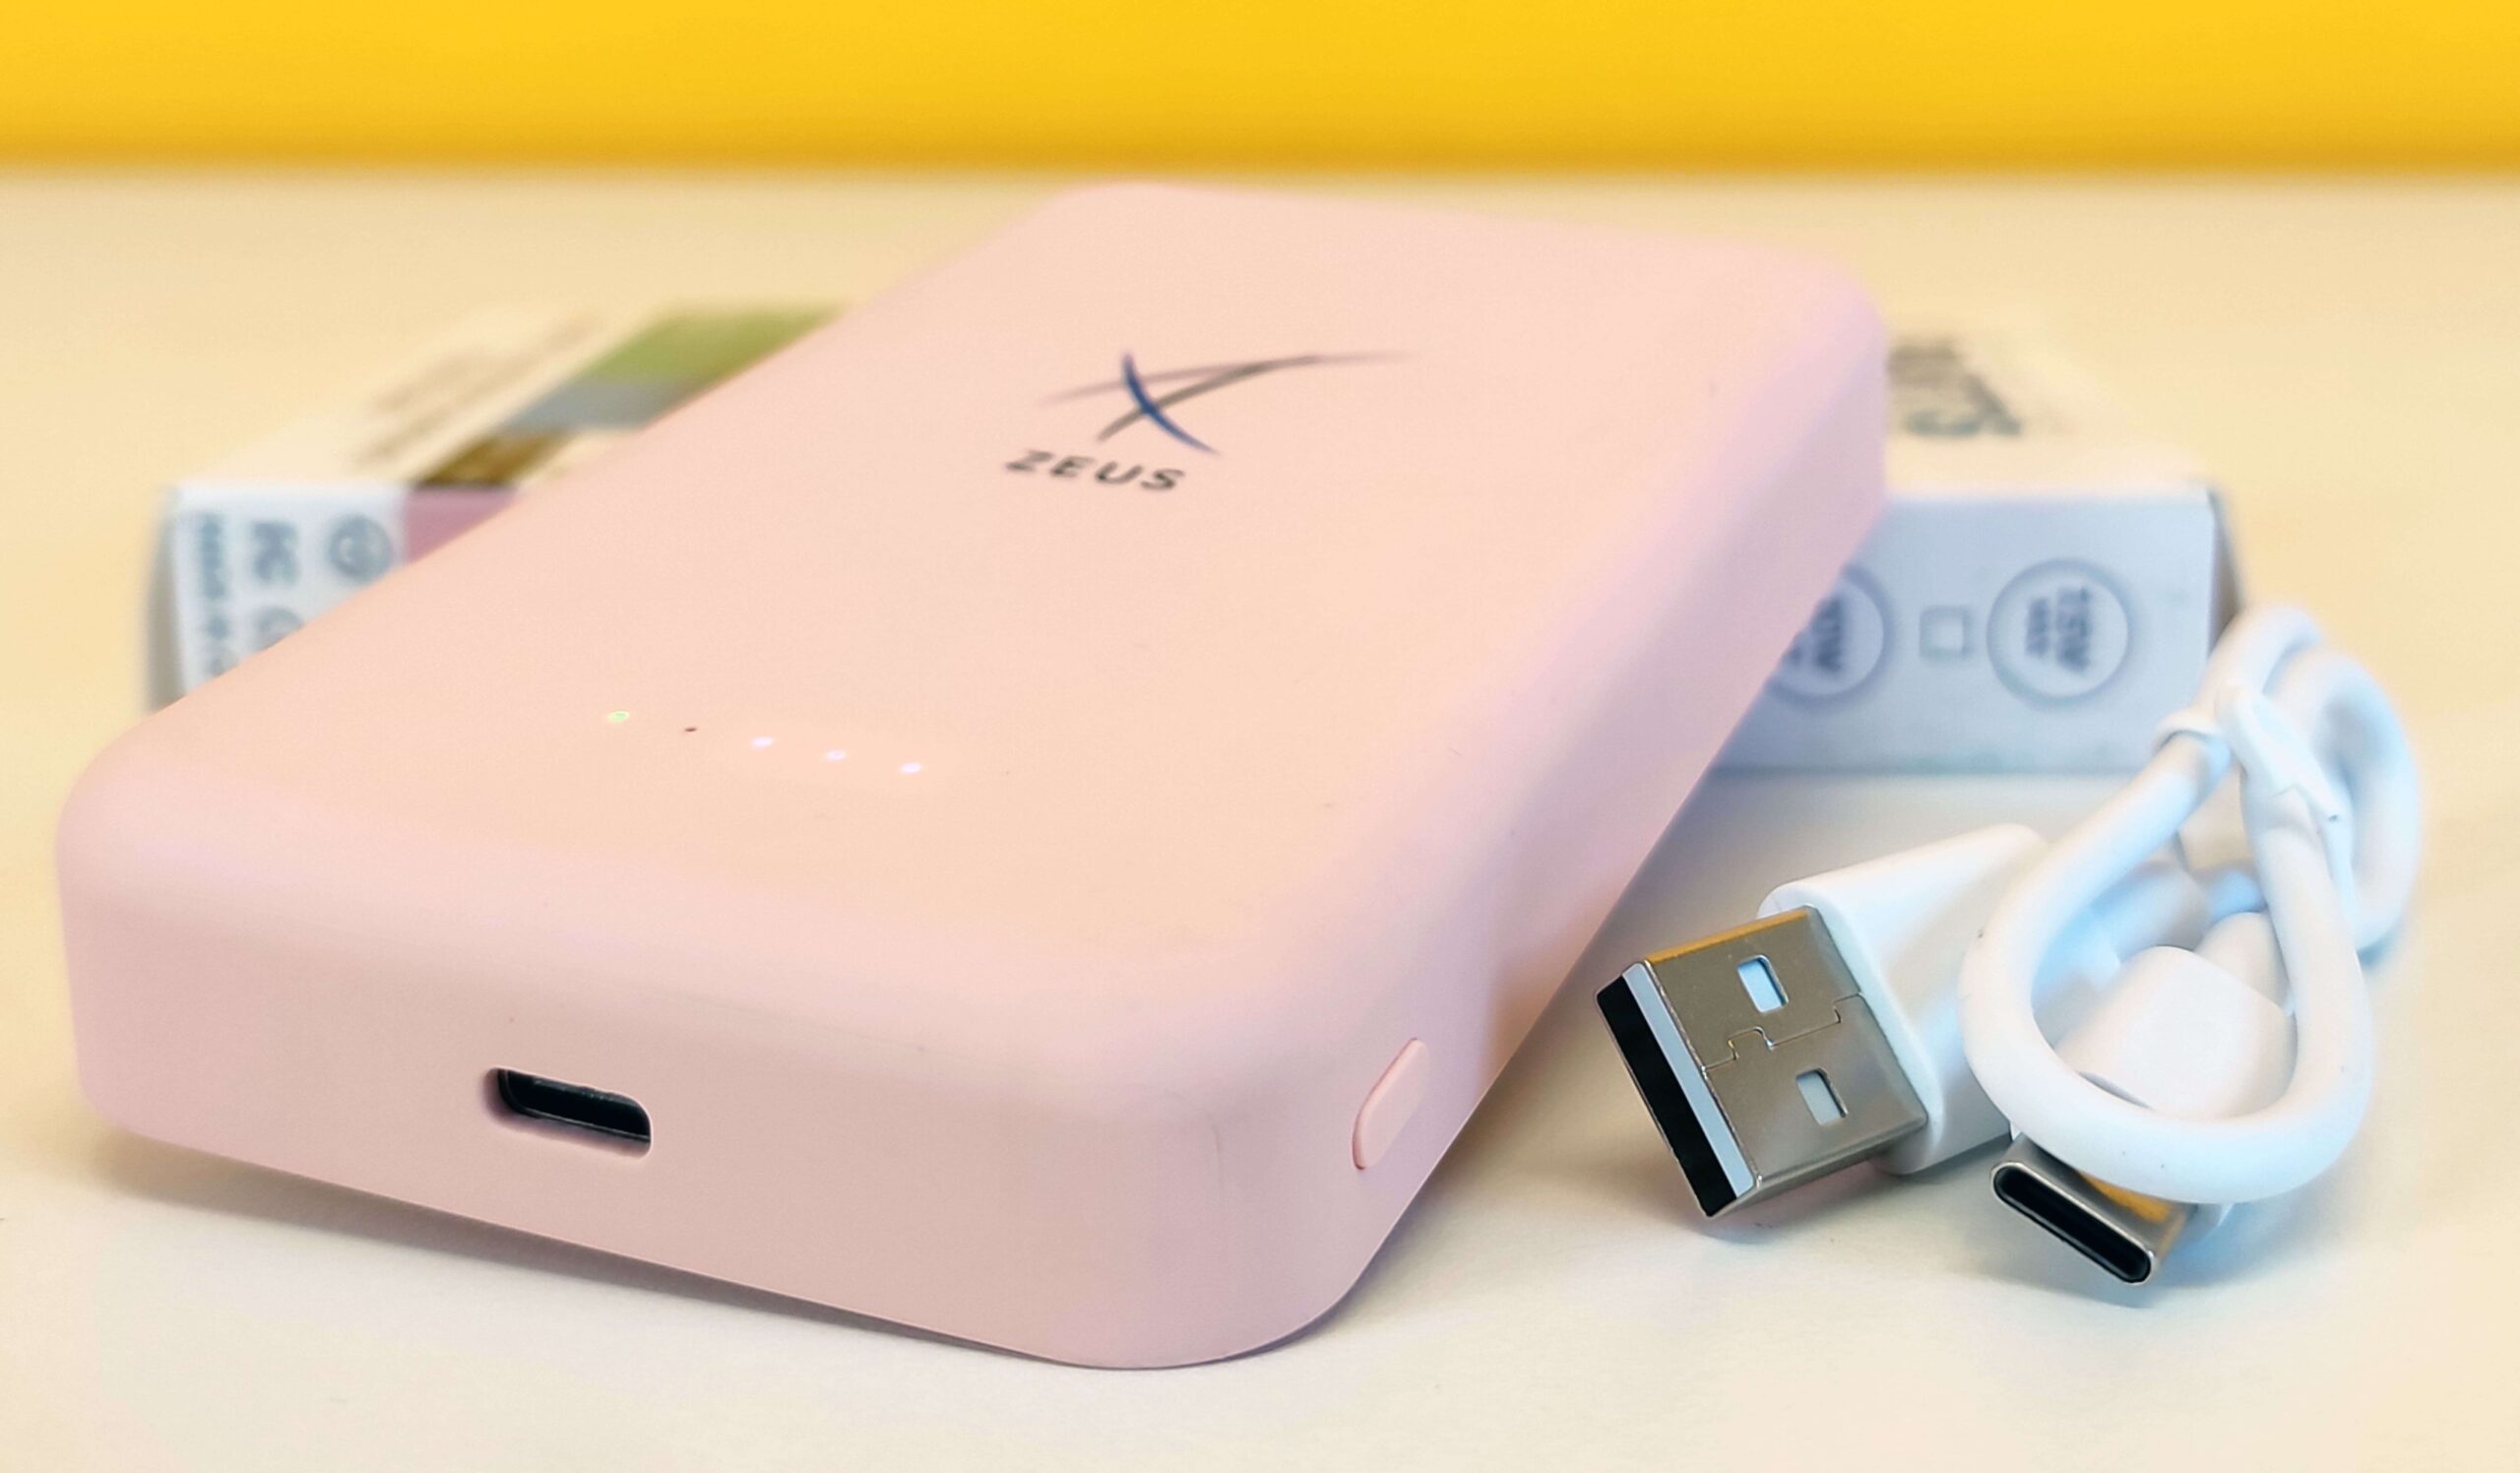 Zeus Power Bank MagSafe 10.000 mAh Ricarica Wireless Qualcomm Quick Charge 3.0 Compatibile con Iphone Samsung Xiaomi Huawei